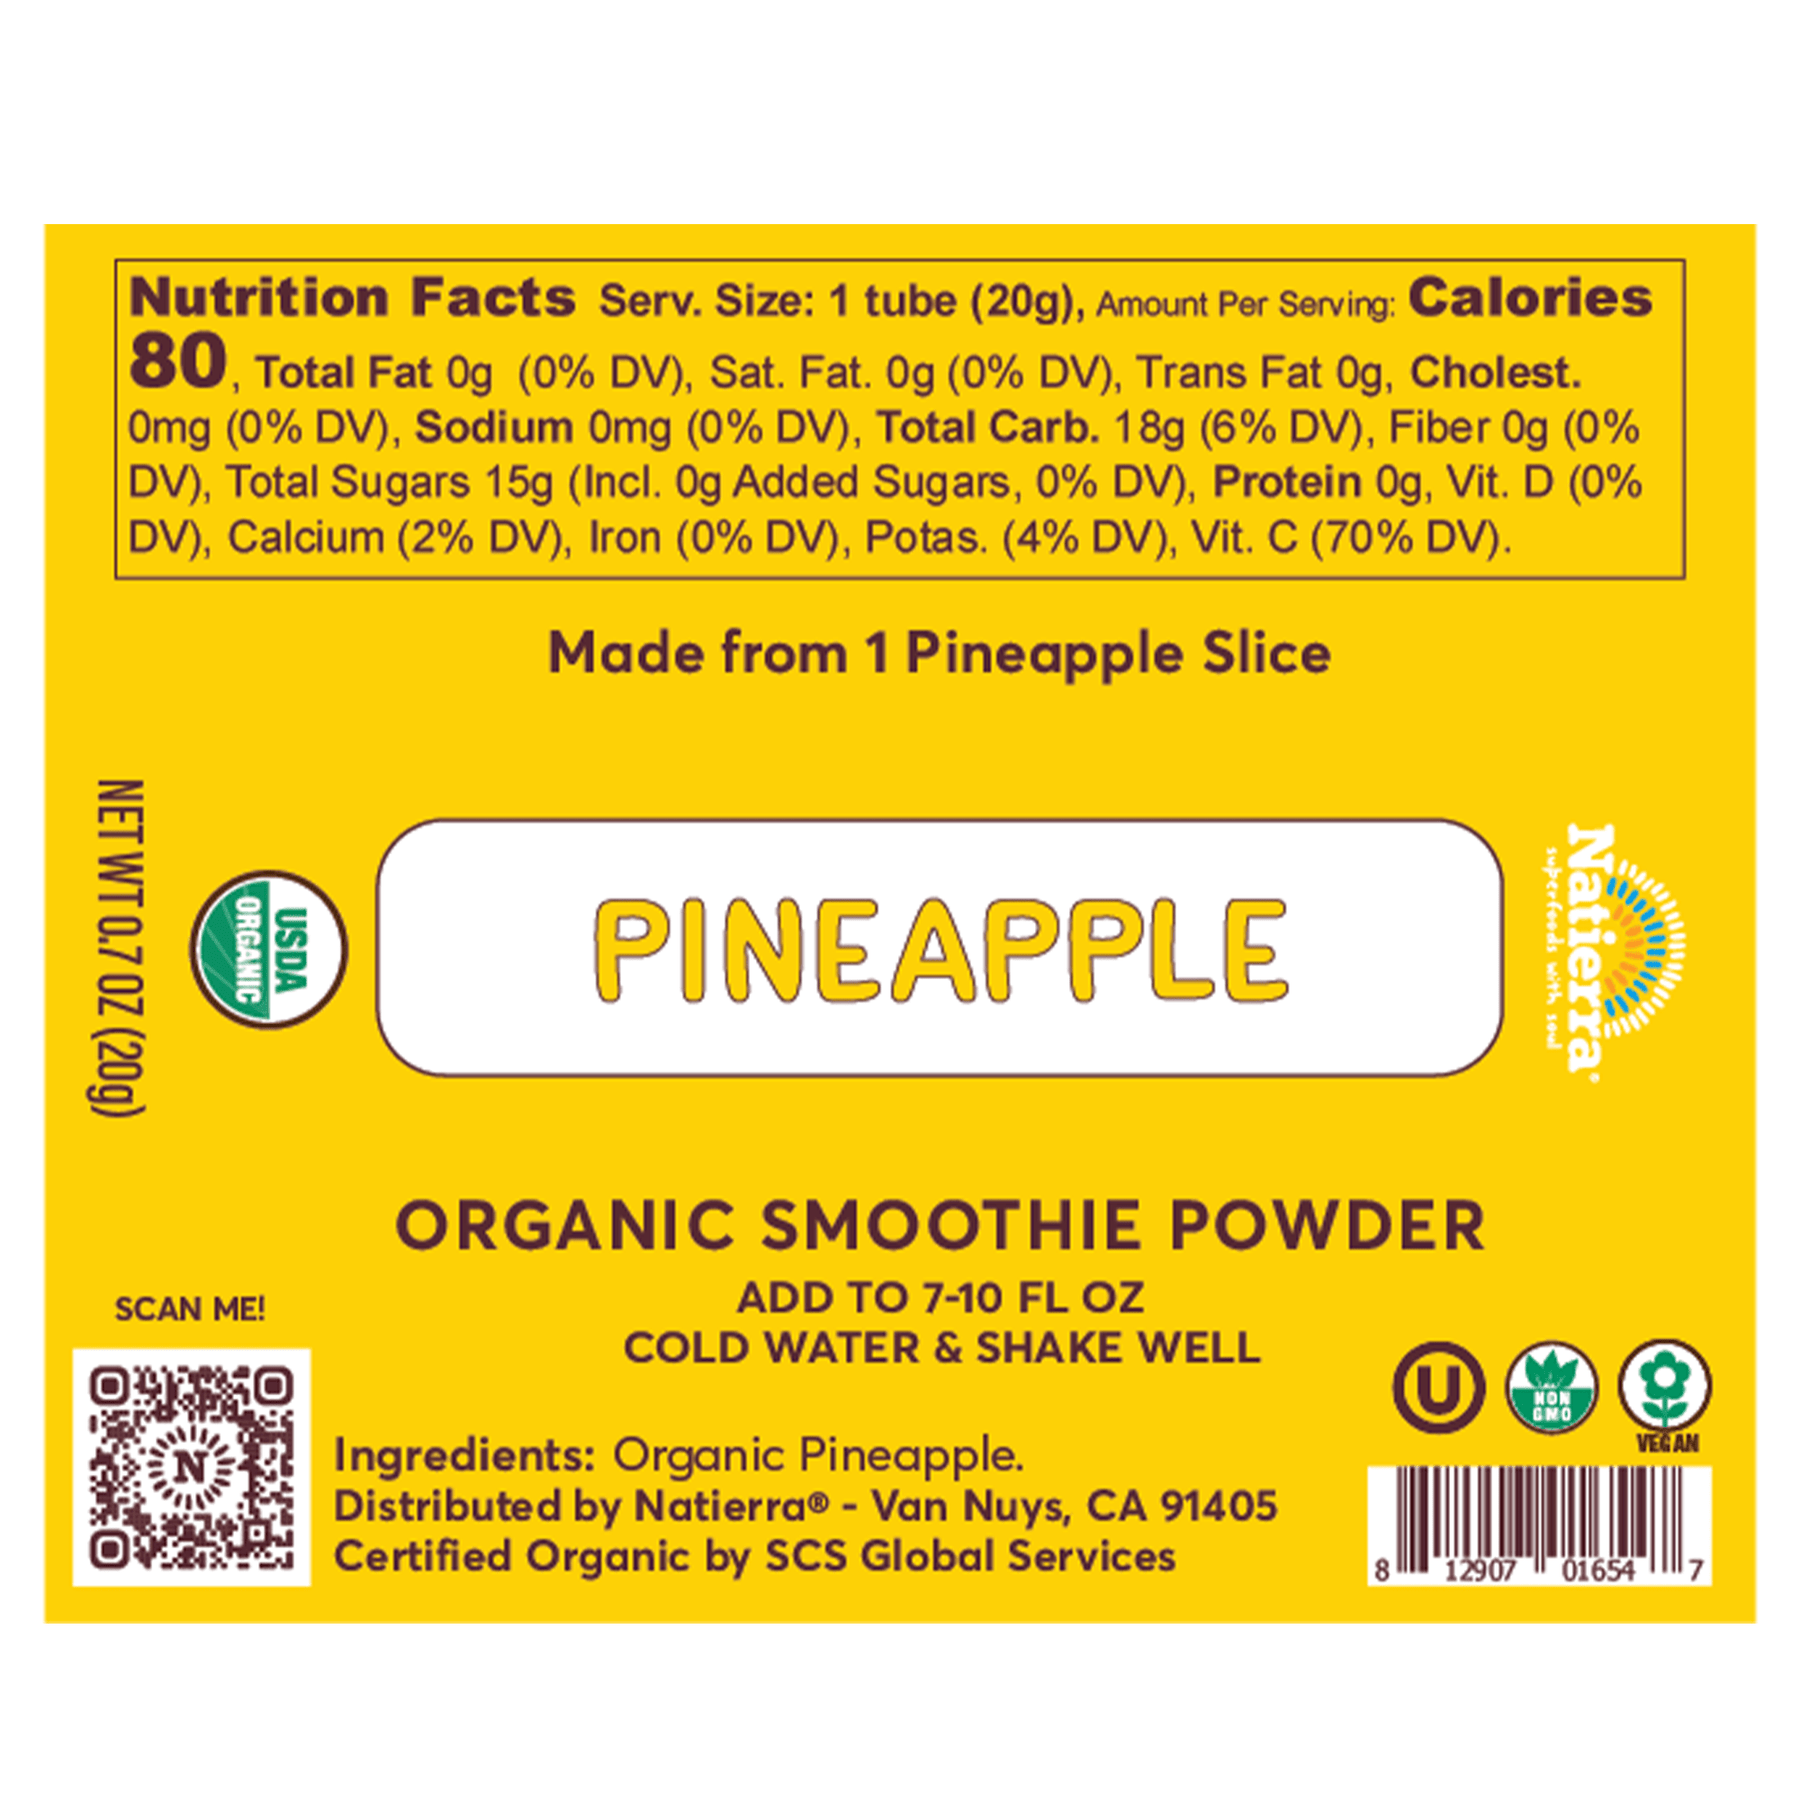 Natierra Organic Pineapple Smoothie Powder nutrition facts